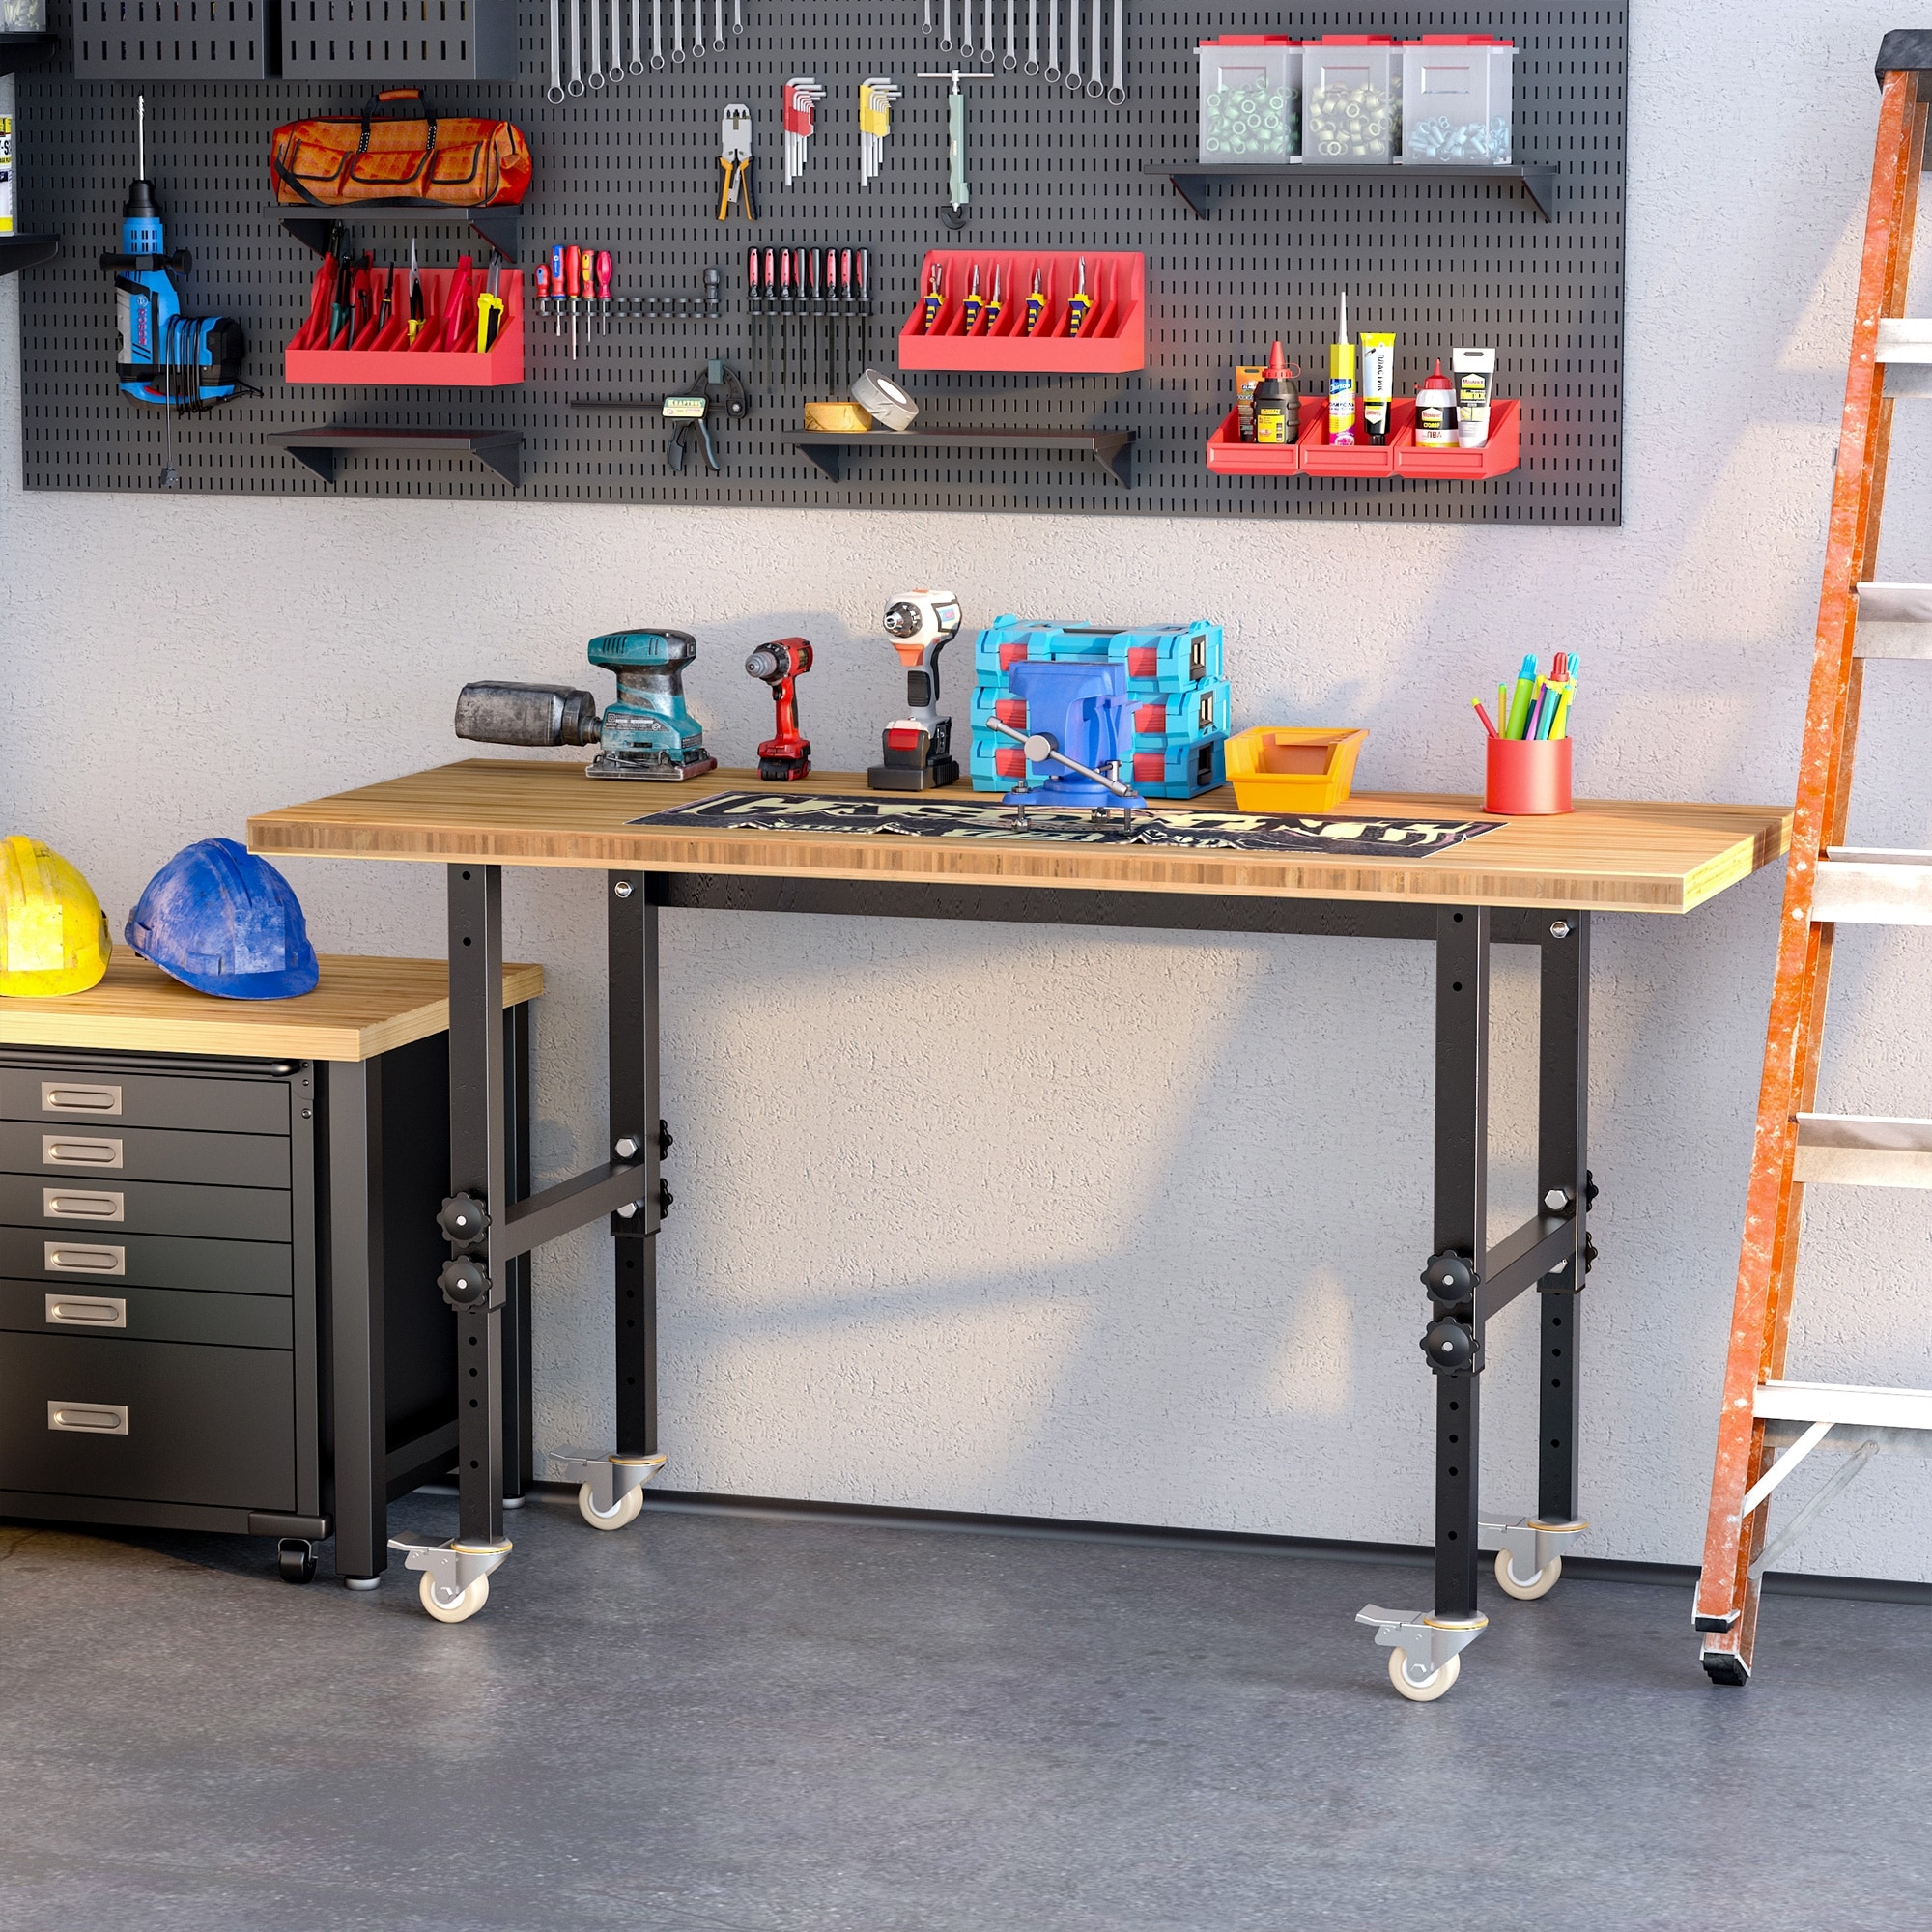 https://ak1.ostkcdn.com/images/products/is/images/direct/977700e1ecce0fecce67dcf048a6ece0d9091c1f/HOMCOM-59%22-Mobile-Project-Workbench-Station-with-Height-Adjustable-Legs-and-Bamboo-Tabletop%2C-Black-Natural.jpg